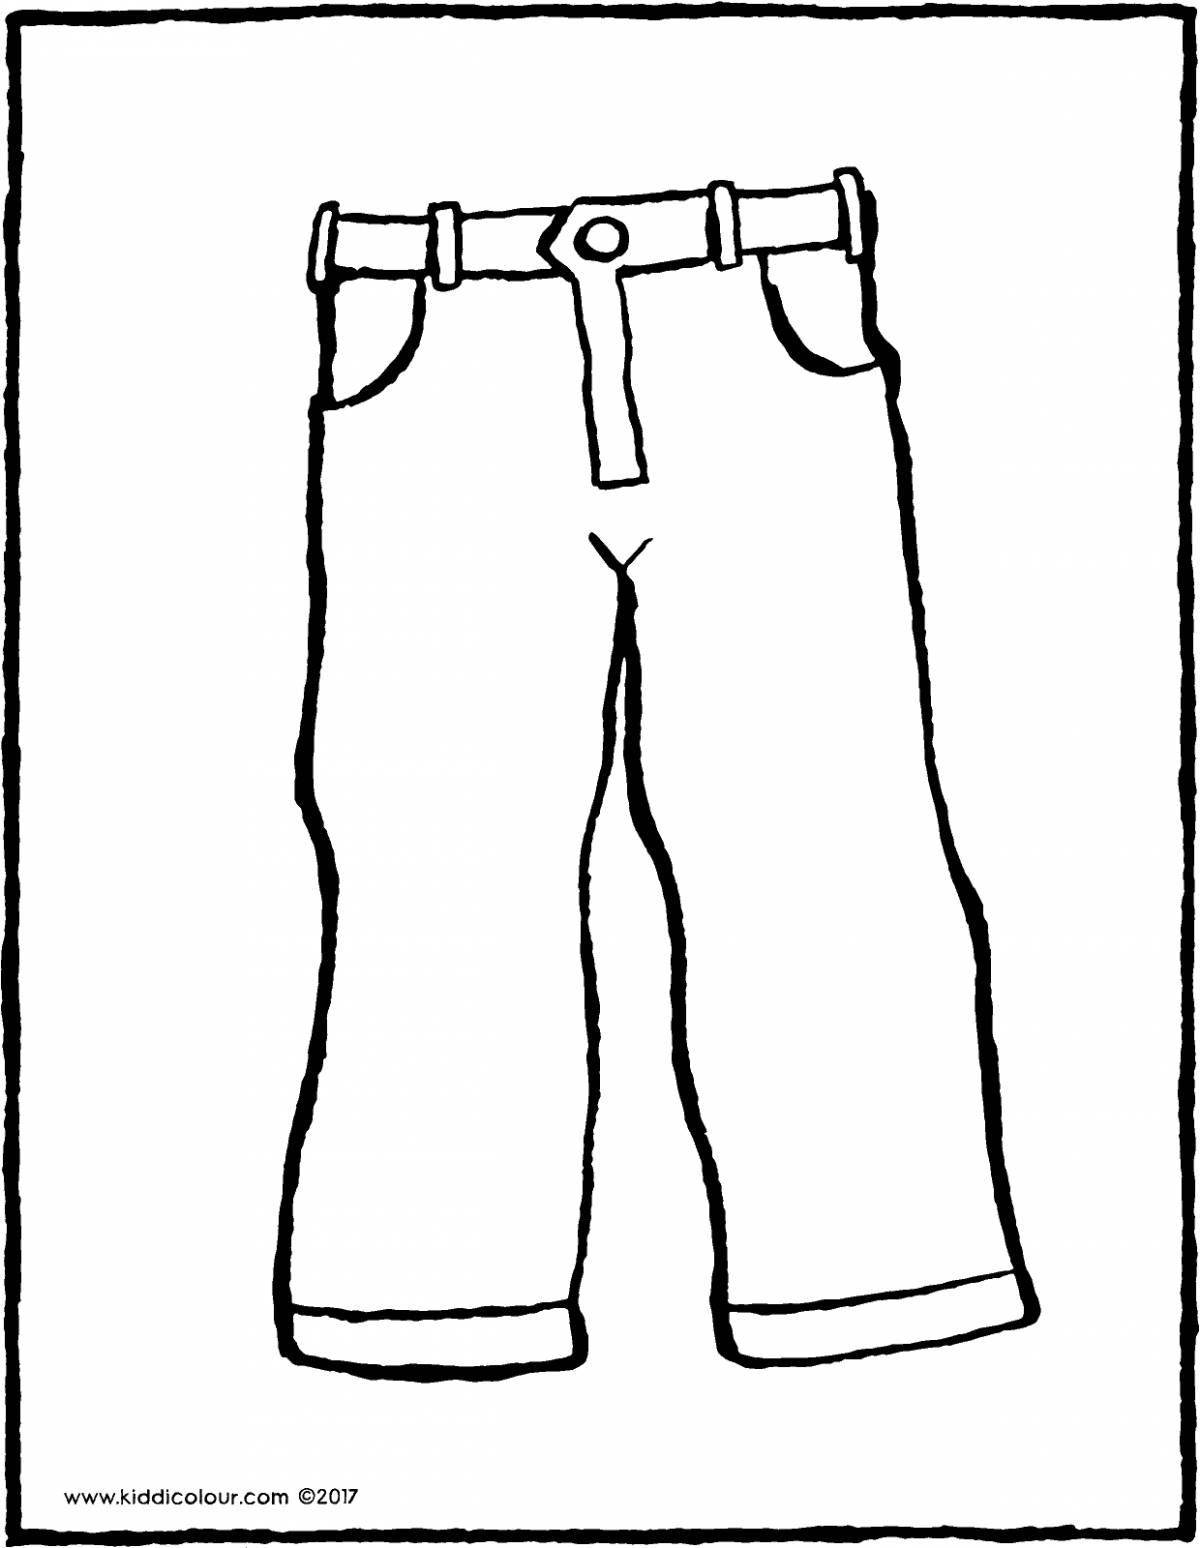 Adorable pants coloring book for kids